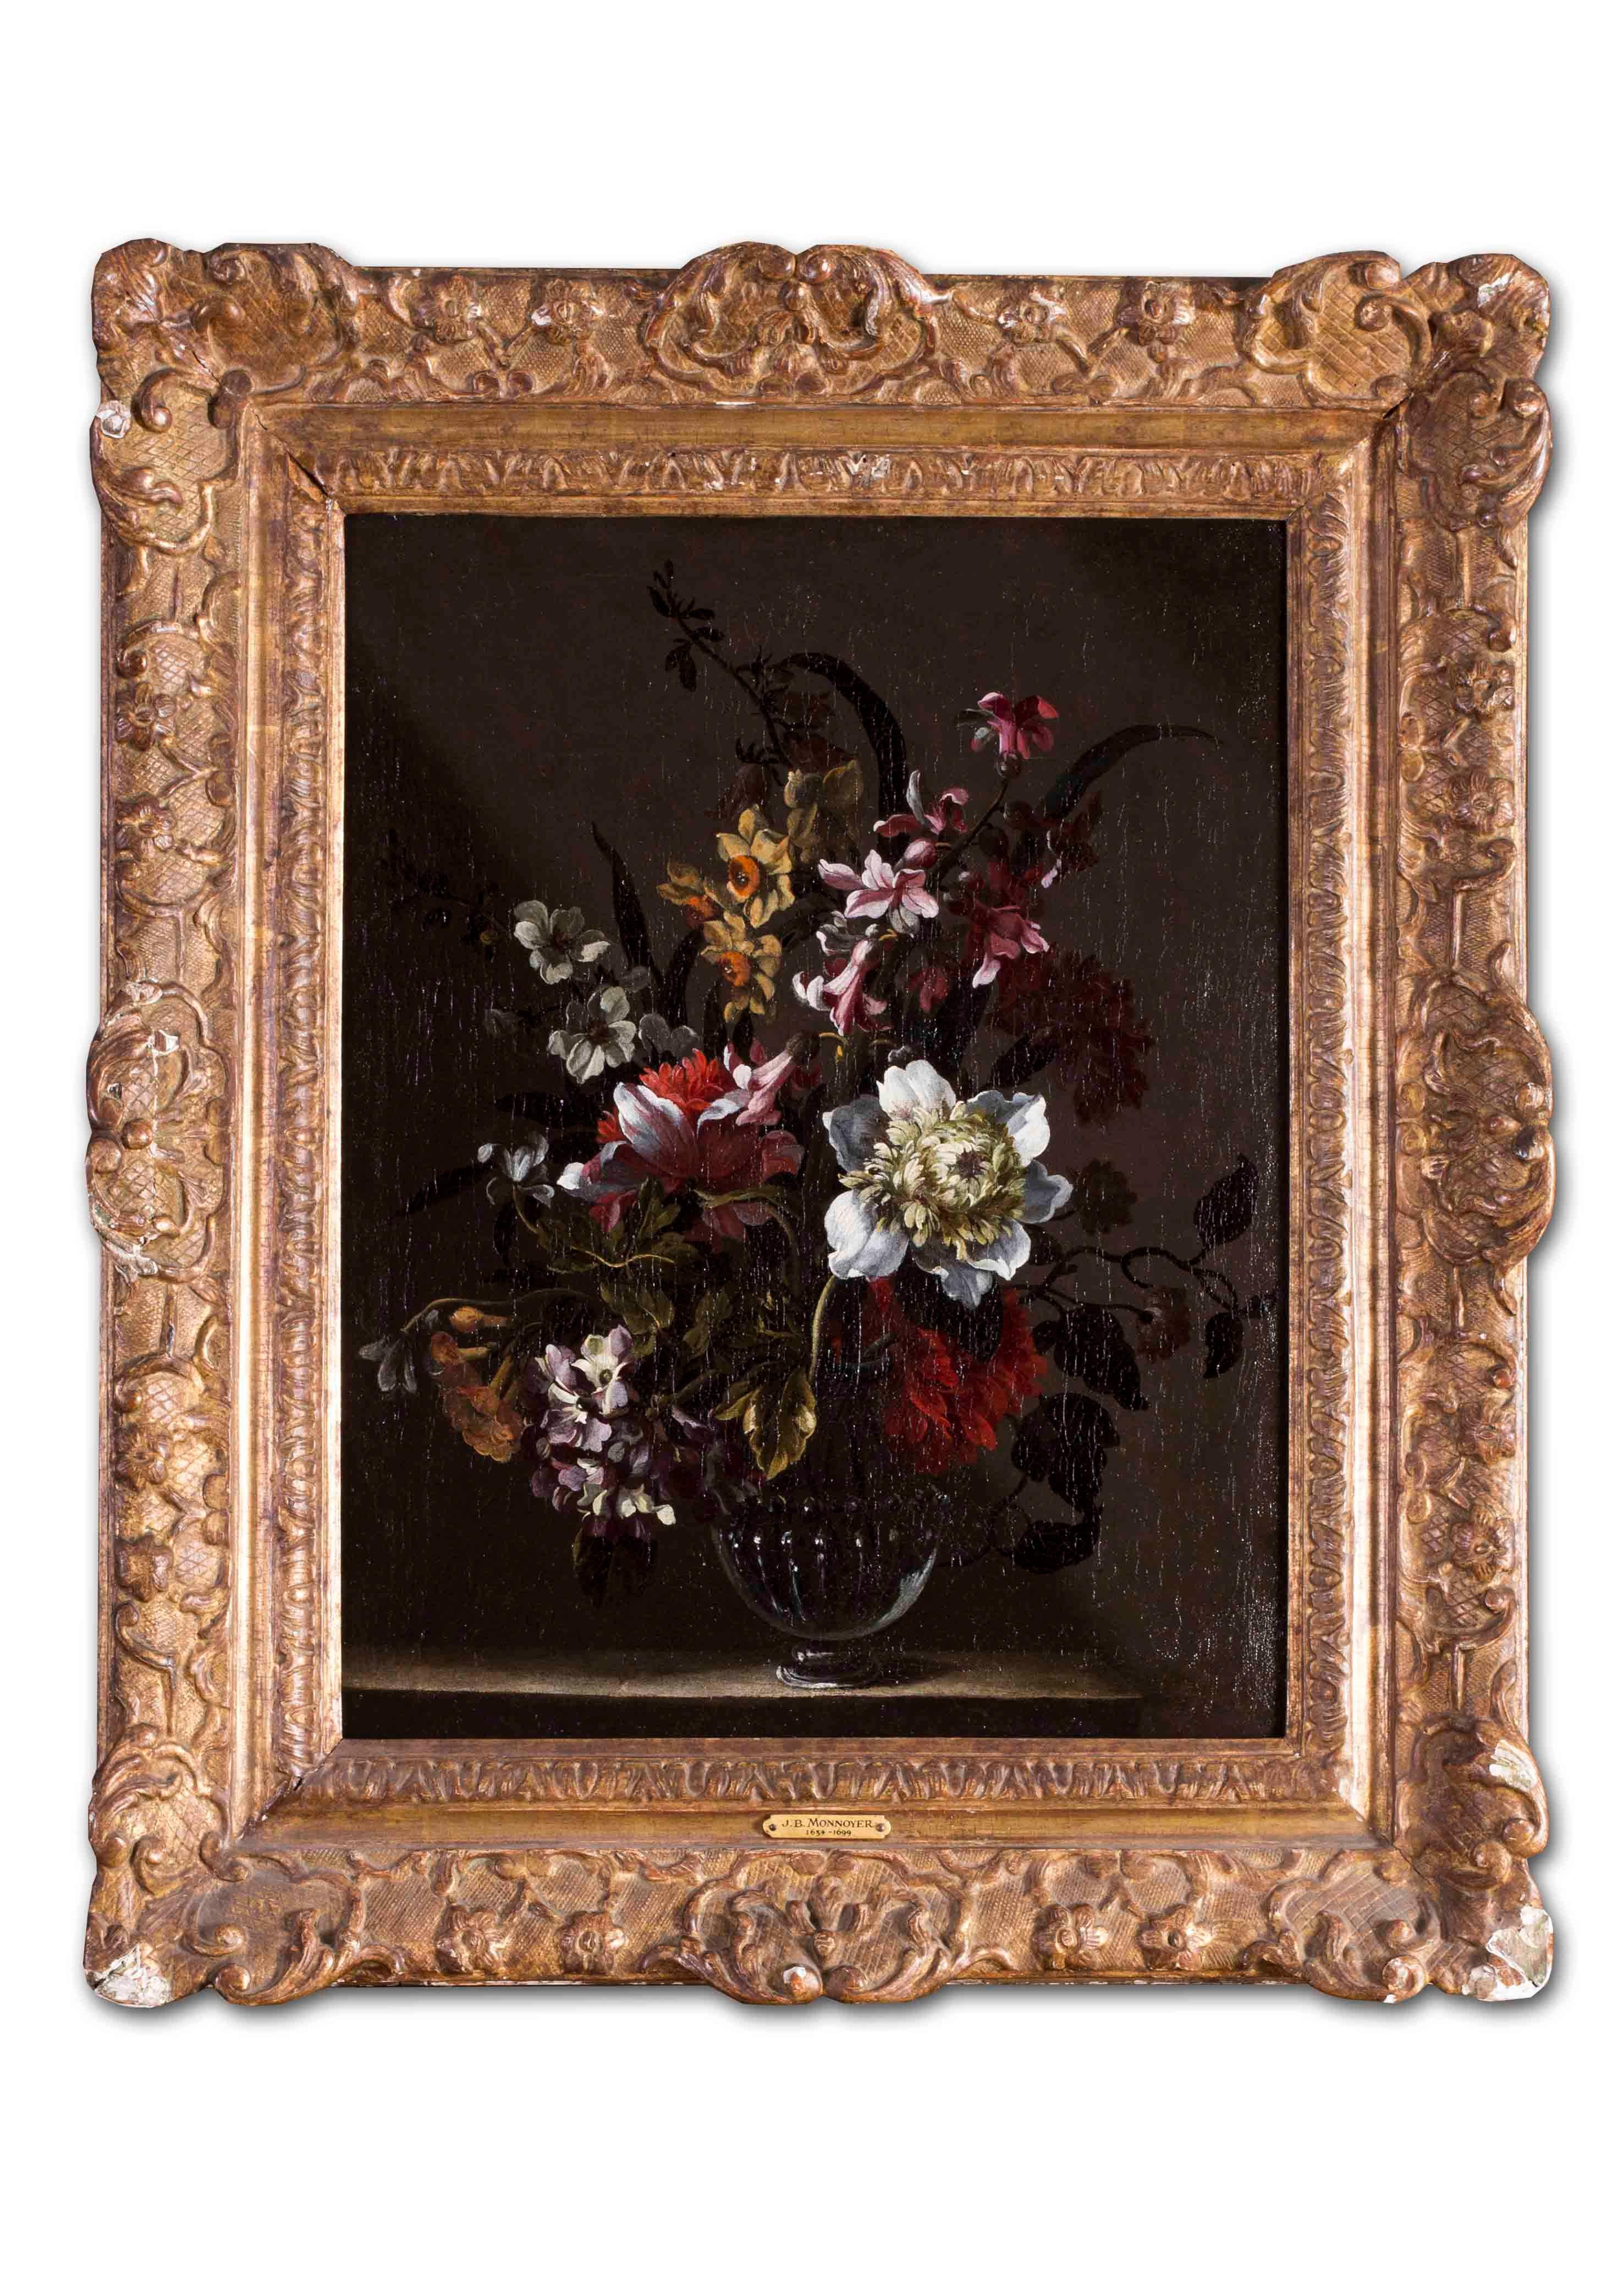 Flemish Old Master oil painting of a still life with flowers in a vase